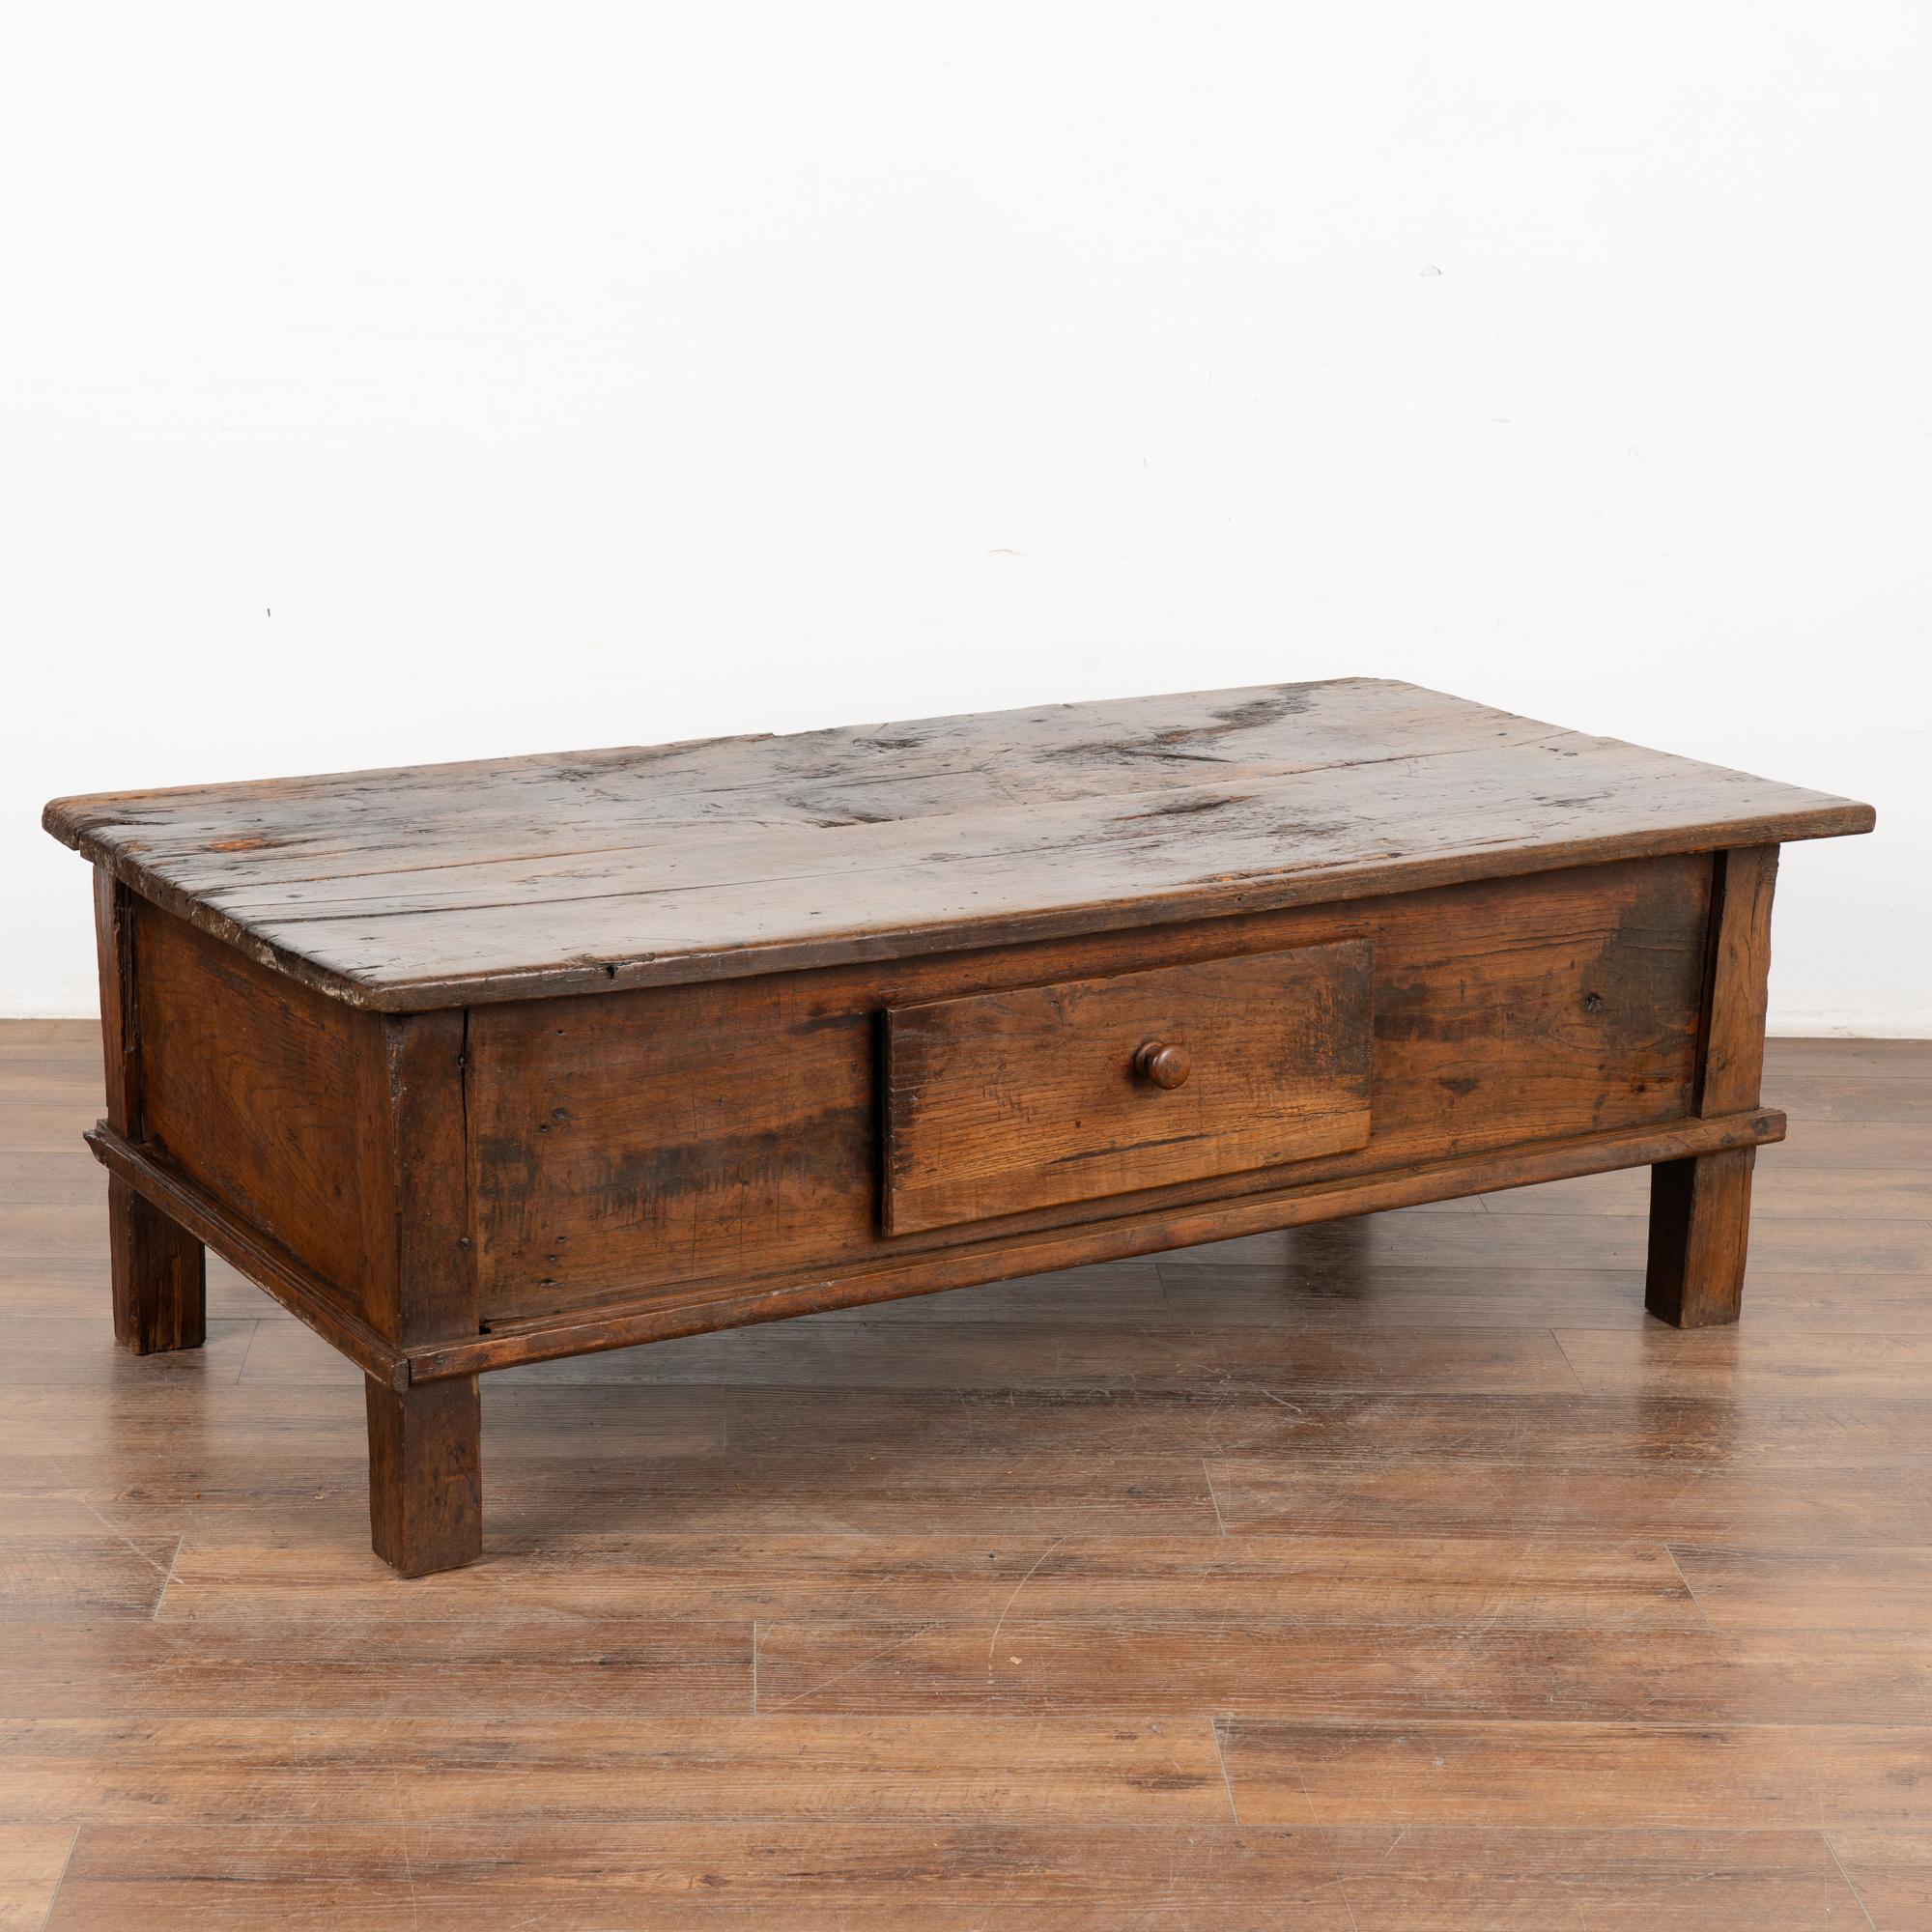 The beauty of this French country coffee table with one large drawer comes from the dep aged patina of the chestnut wood. Every crack, ding, gouge, old knot and stain all add to the depth and richness found in the worn top. 
Restored, strong and